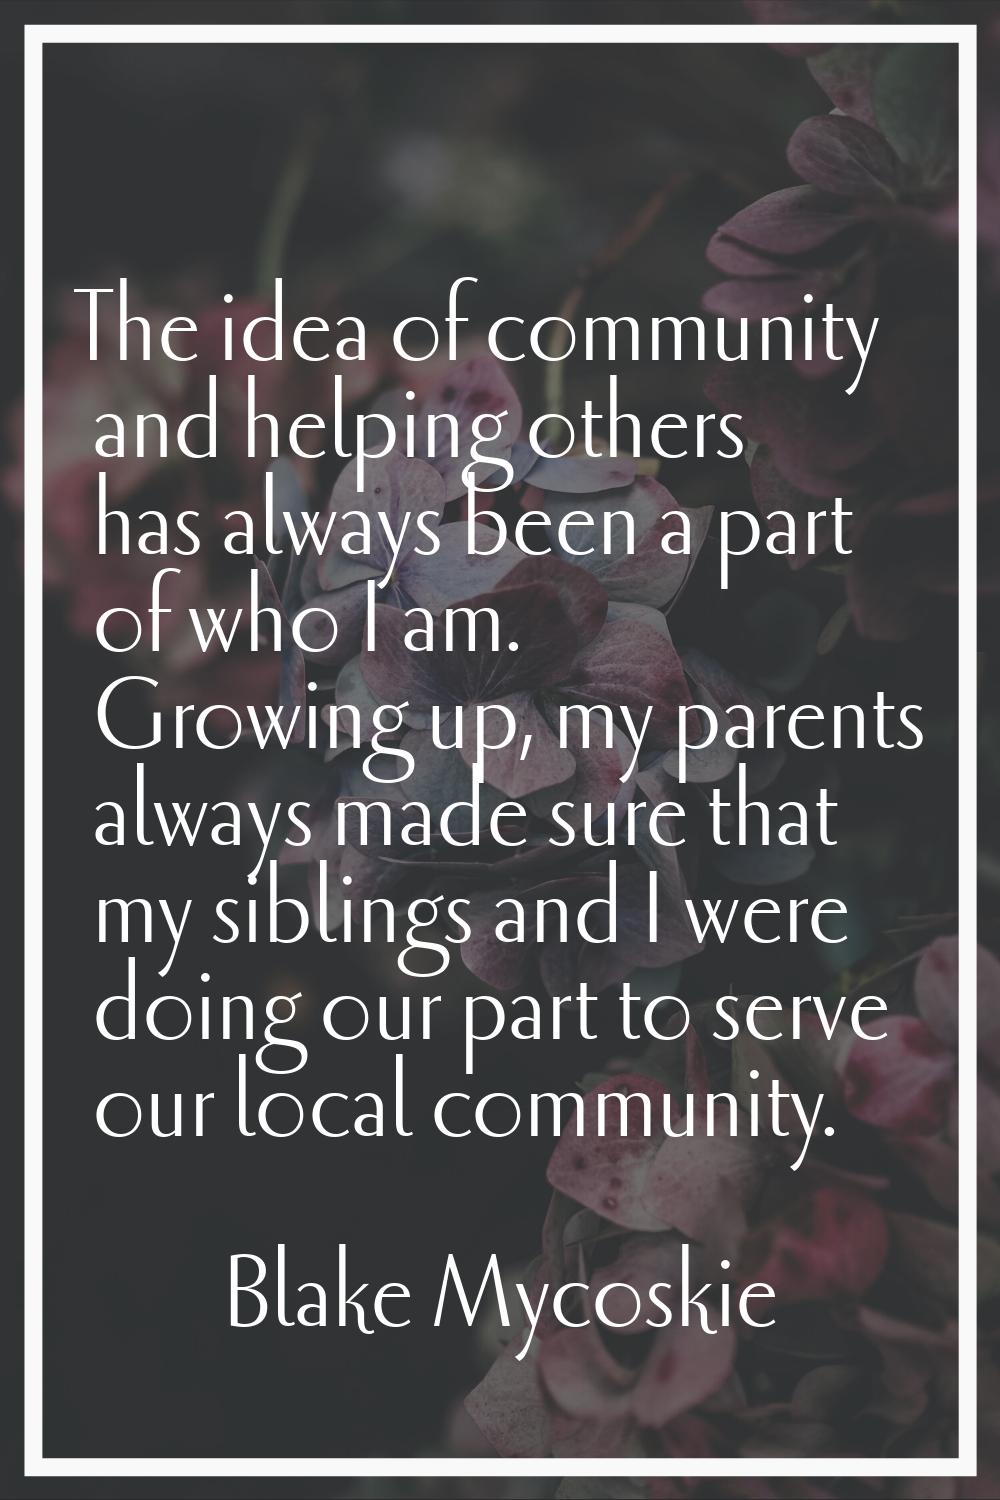 The idea of community and helping others has always been a part of who I am. Growing up, my parents